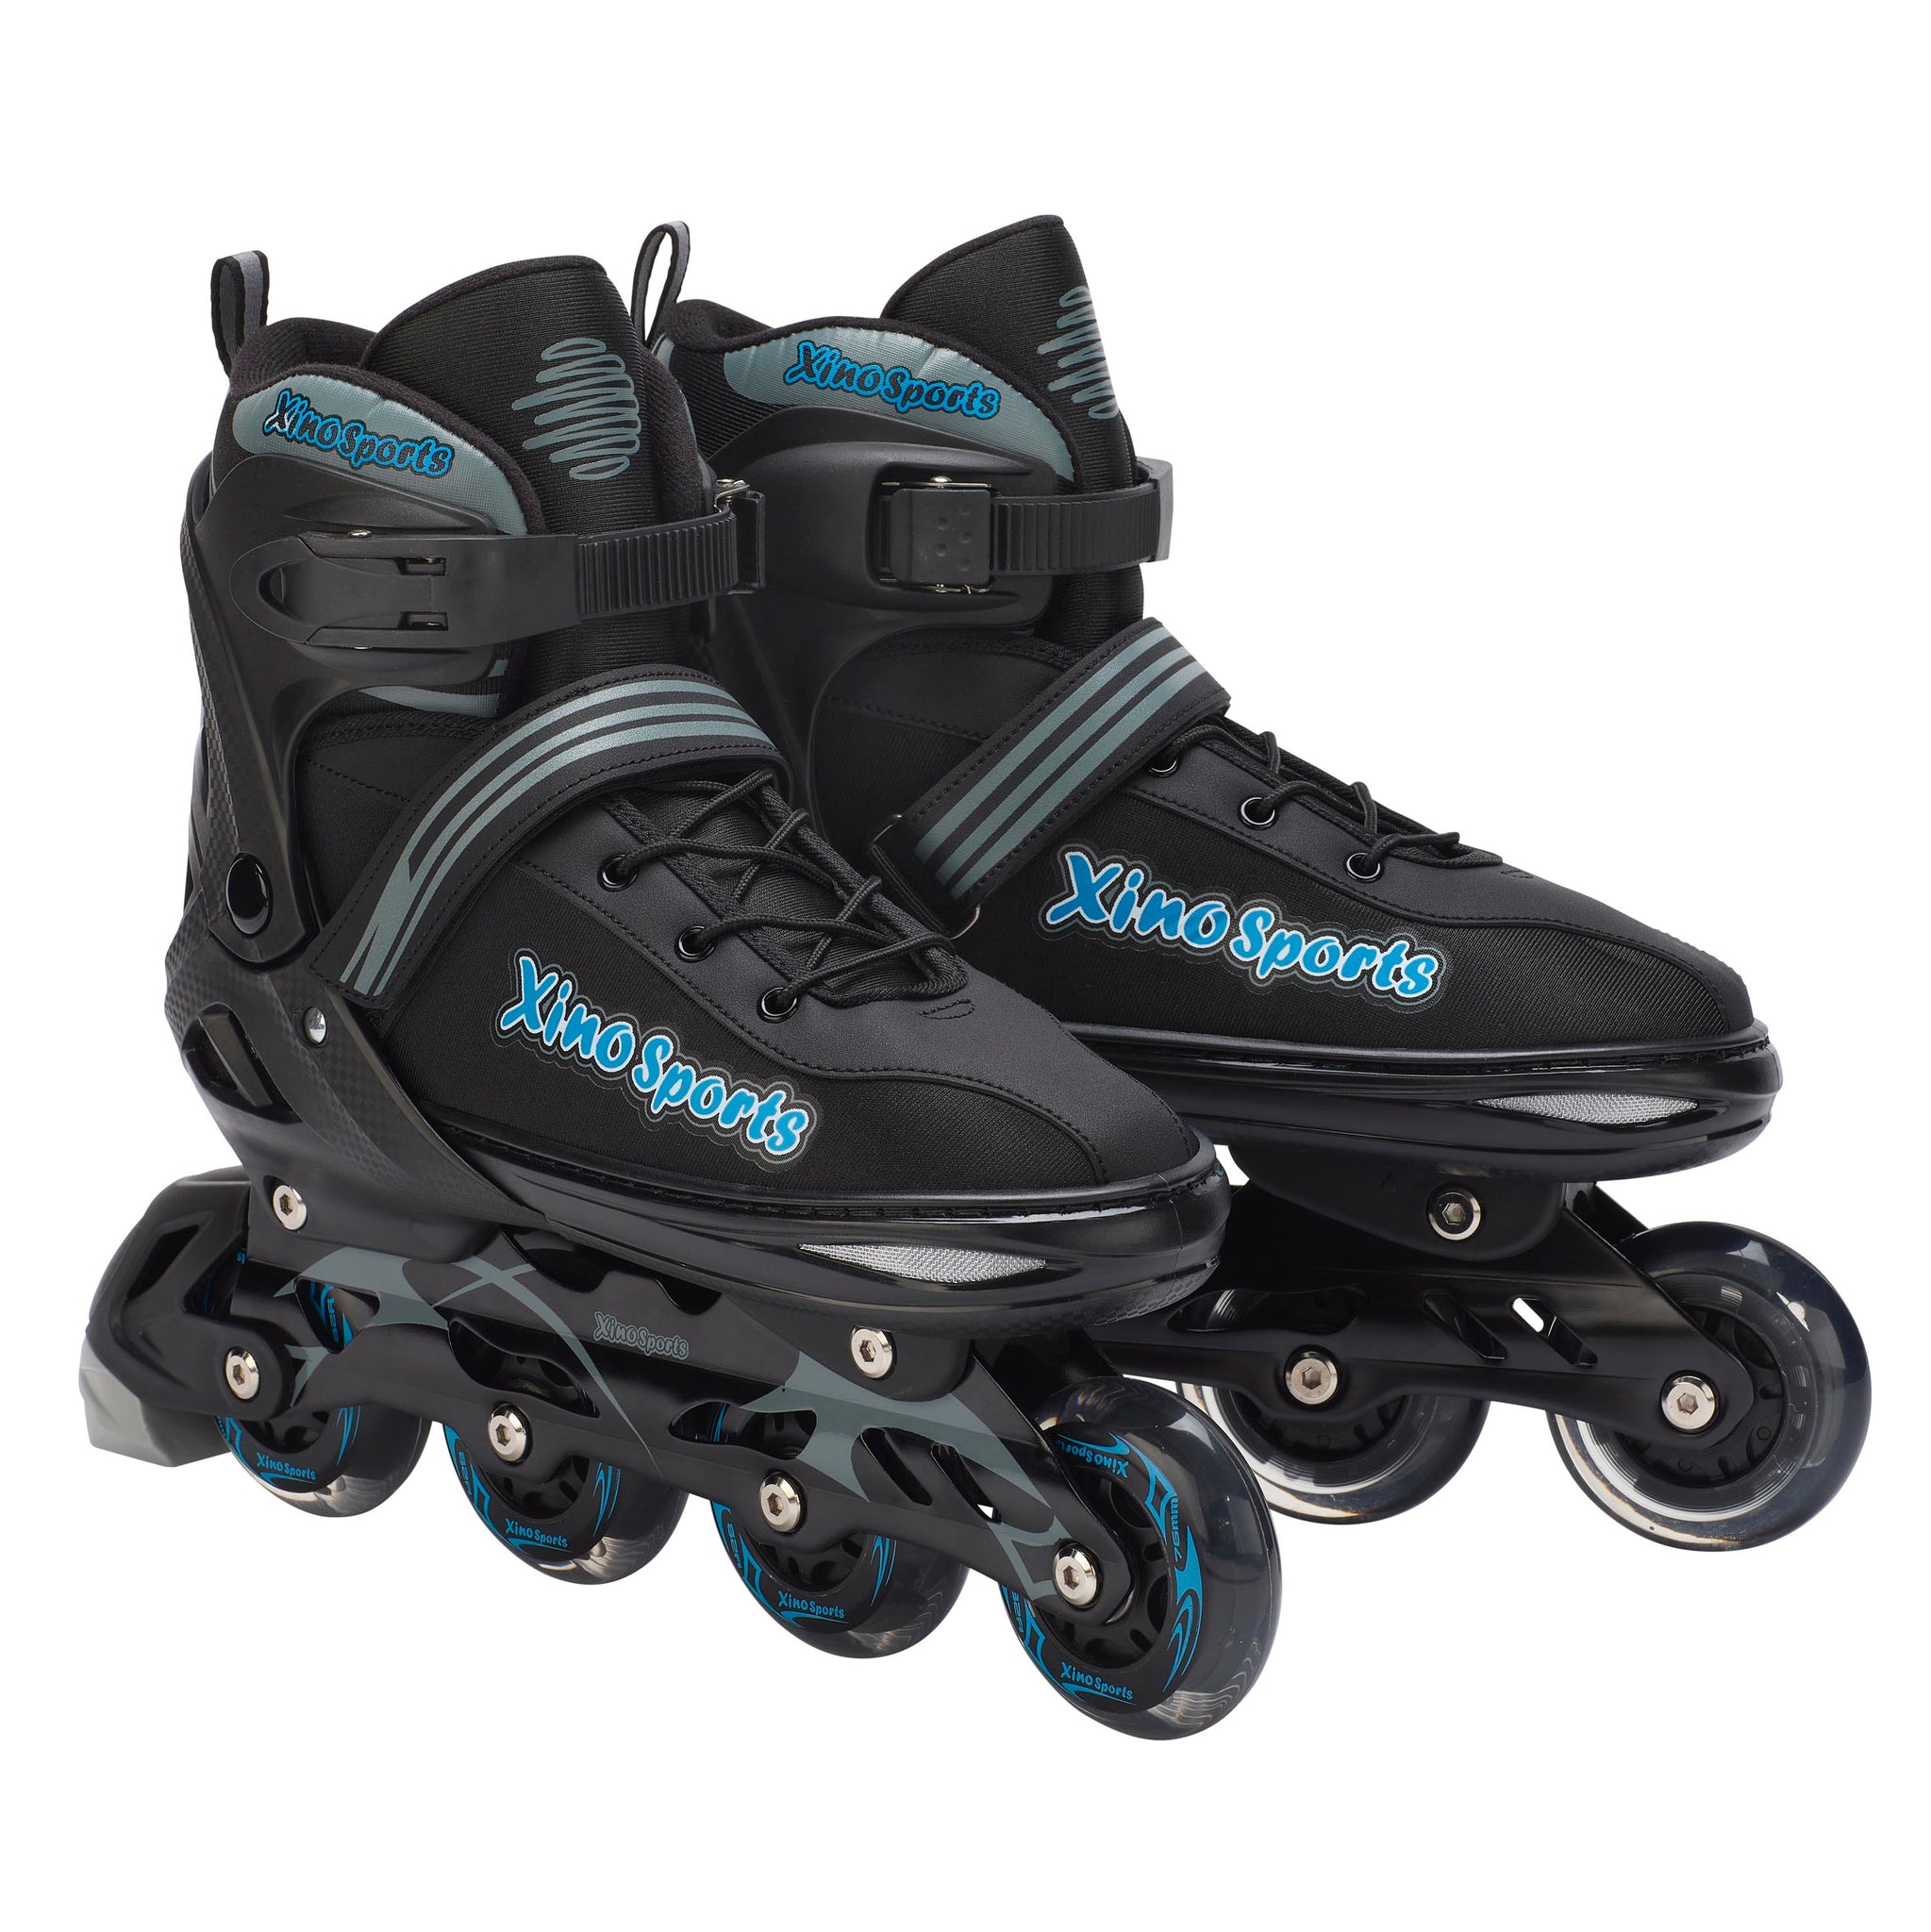 Adjustable rollerblades and quad skates for kids - Xino Sports